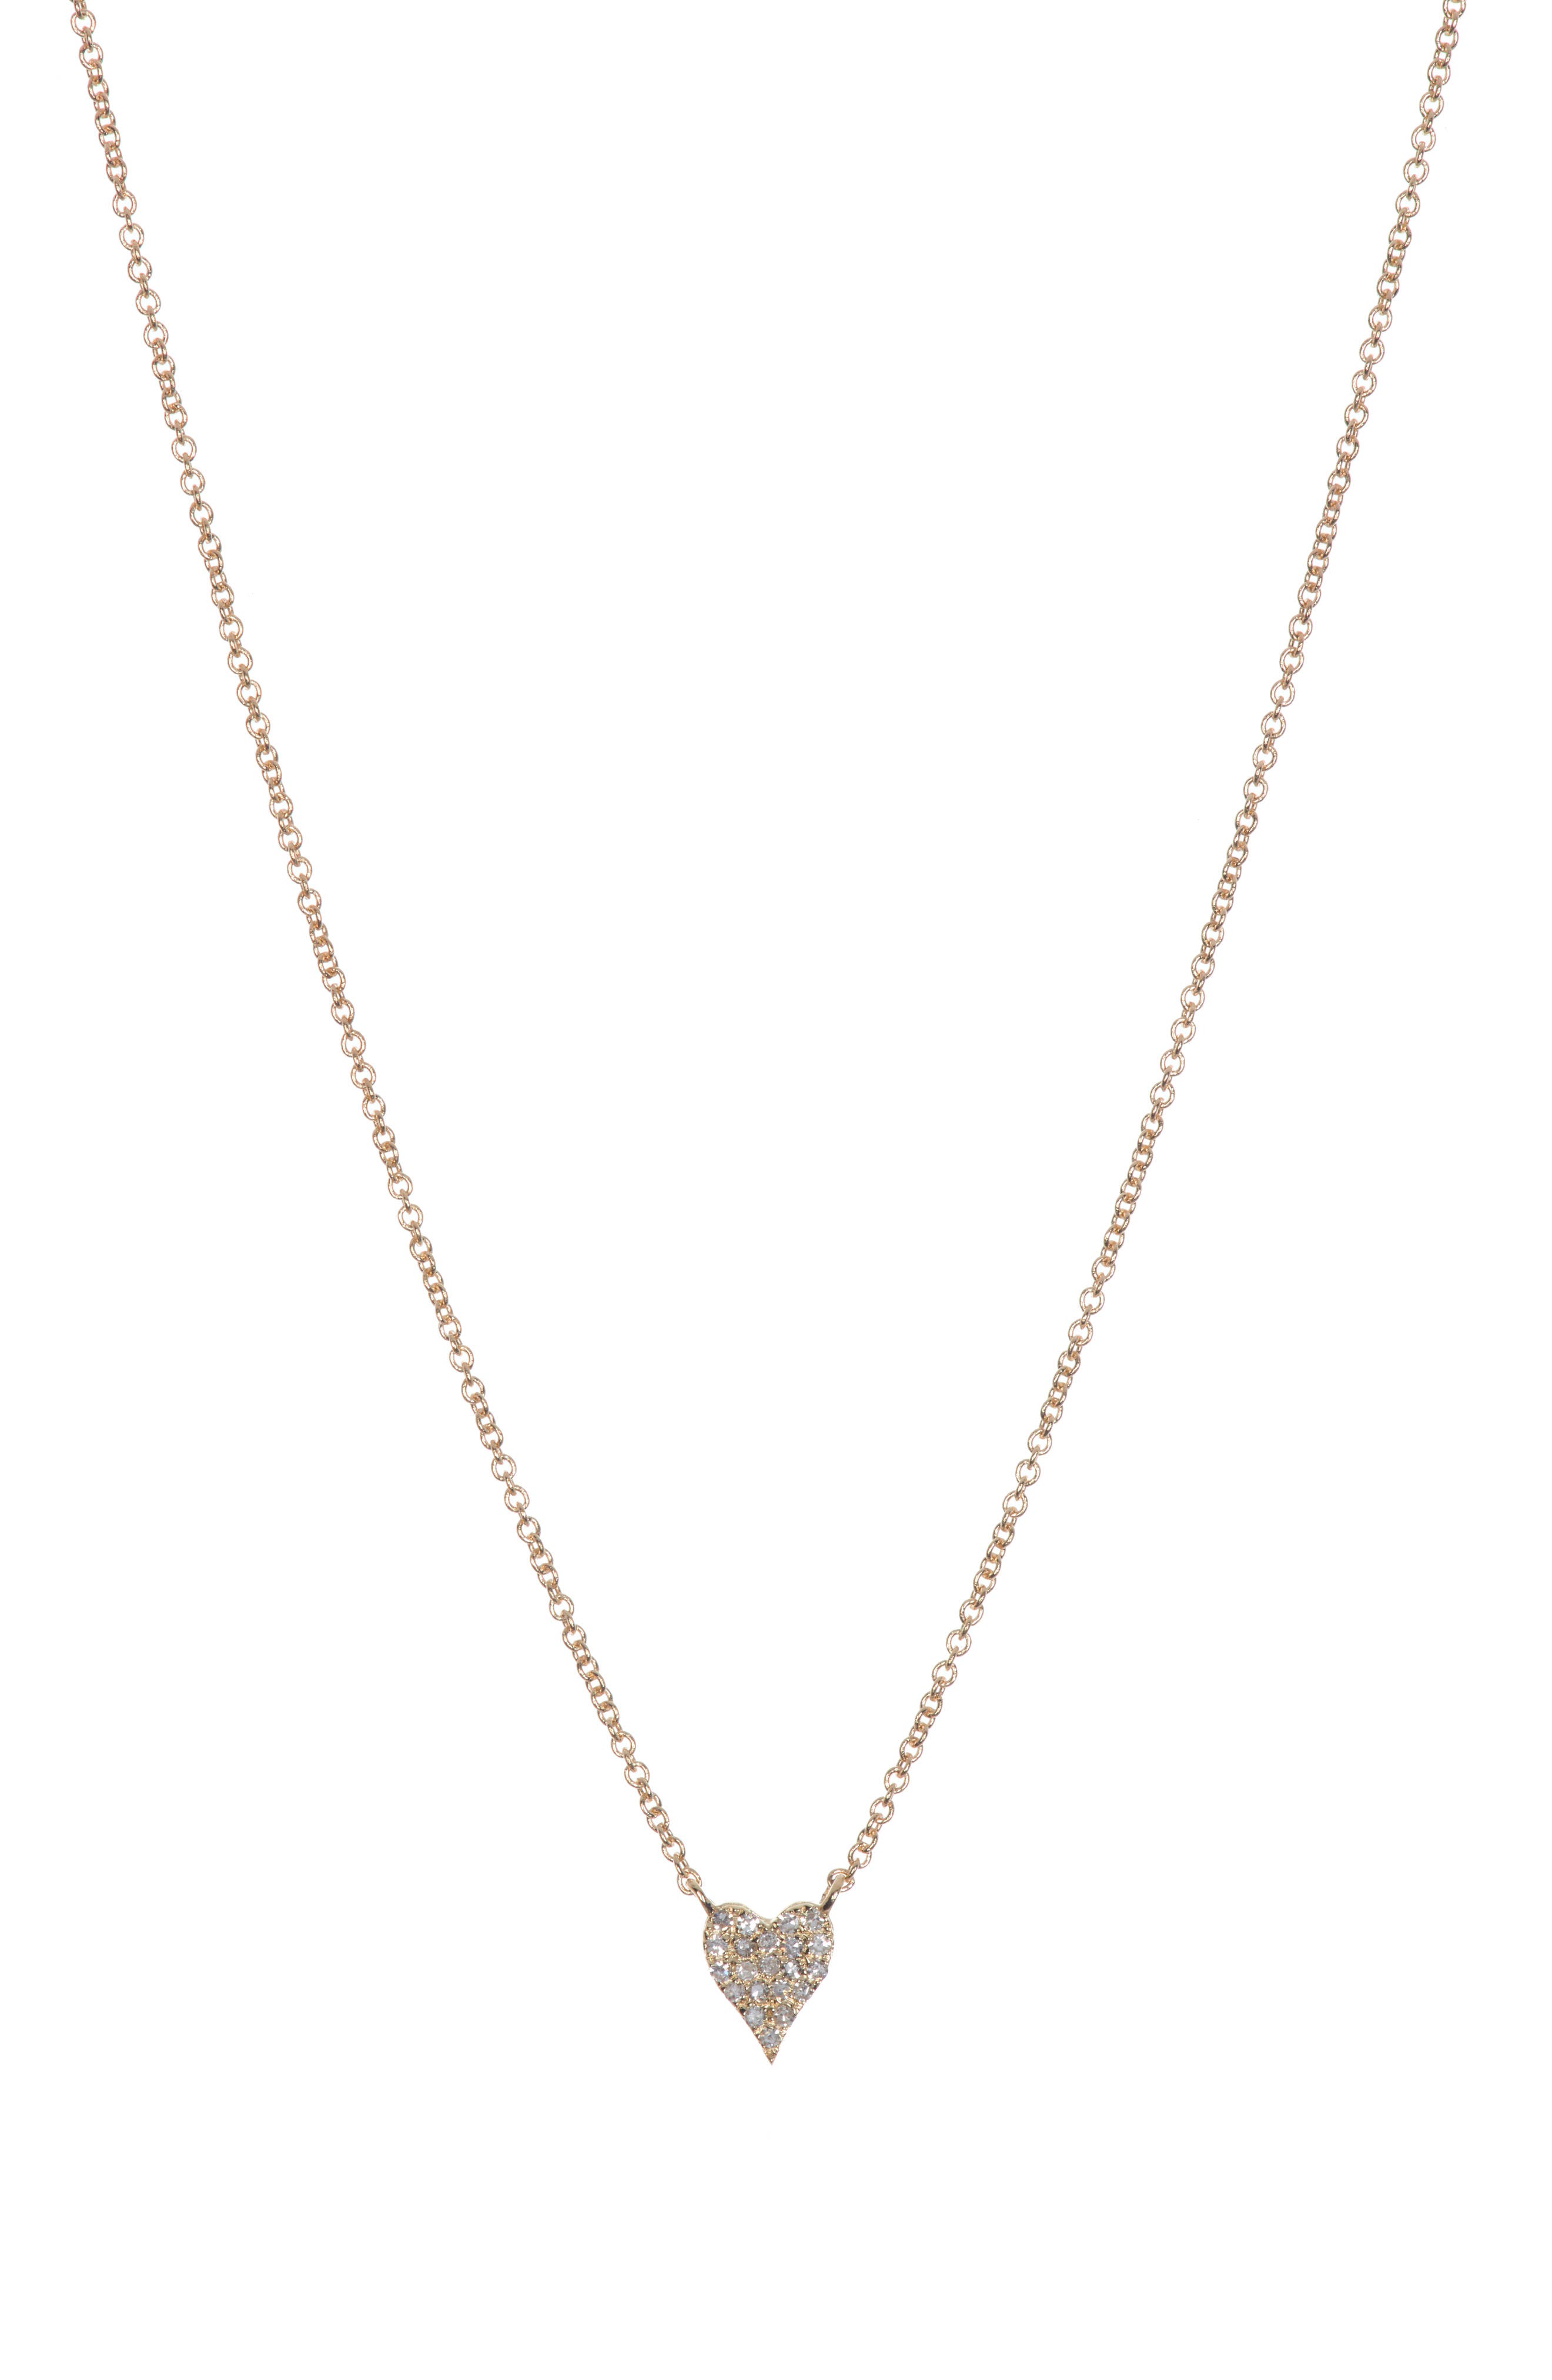 Cards symbol charm necklace,spade/heart/diamond/club,gold/rose gold/silver color